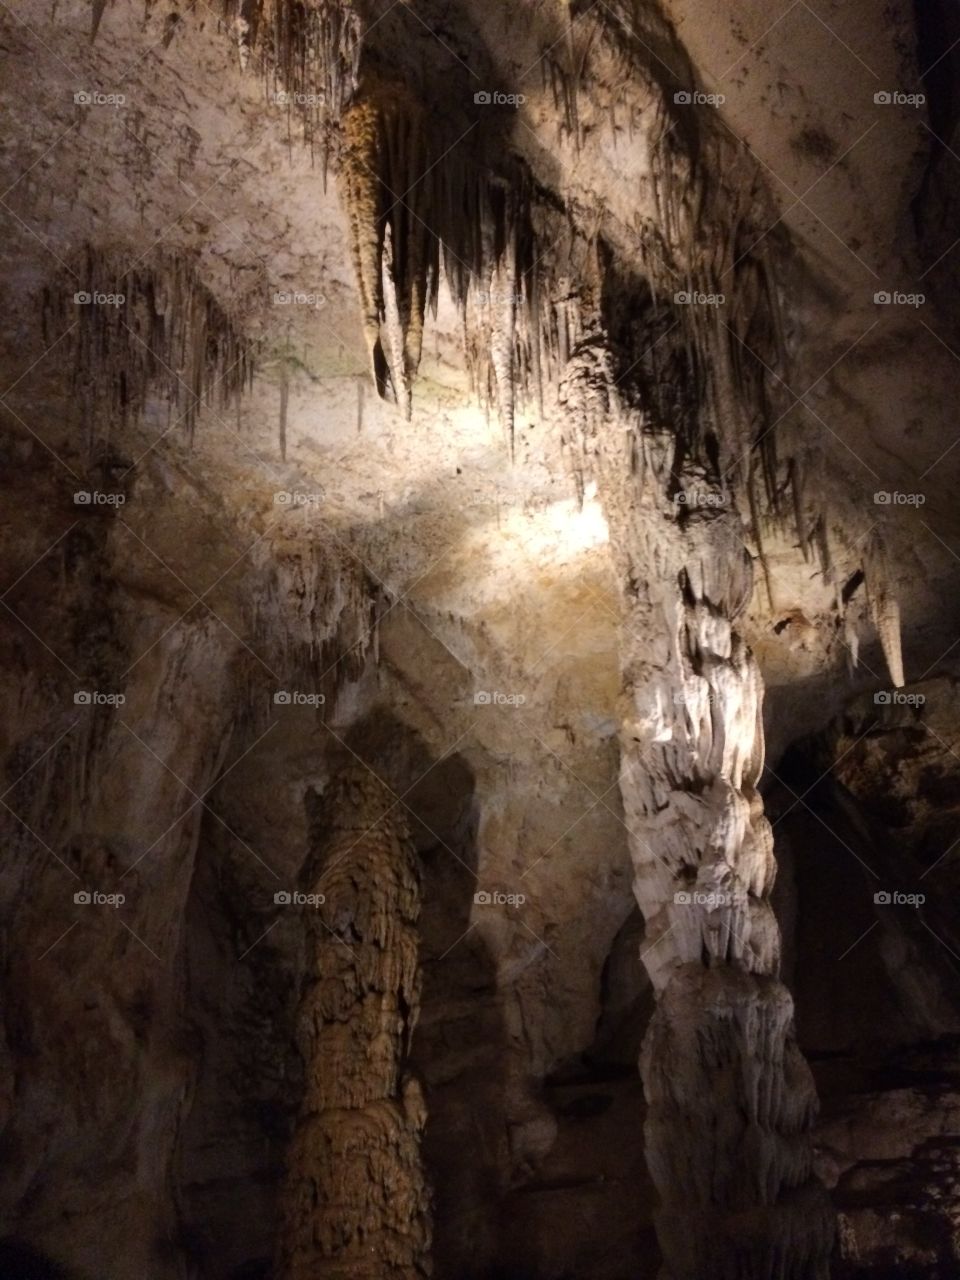 Formations in Carlsbad caverns